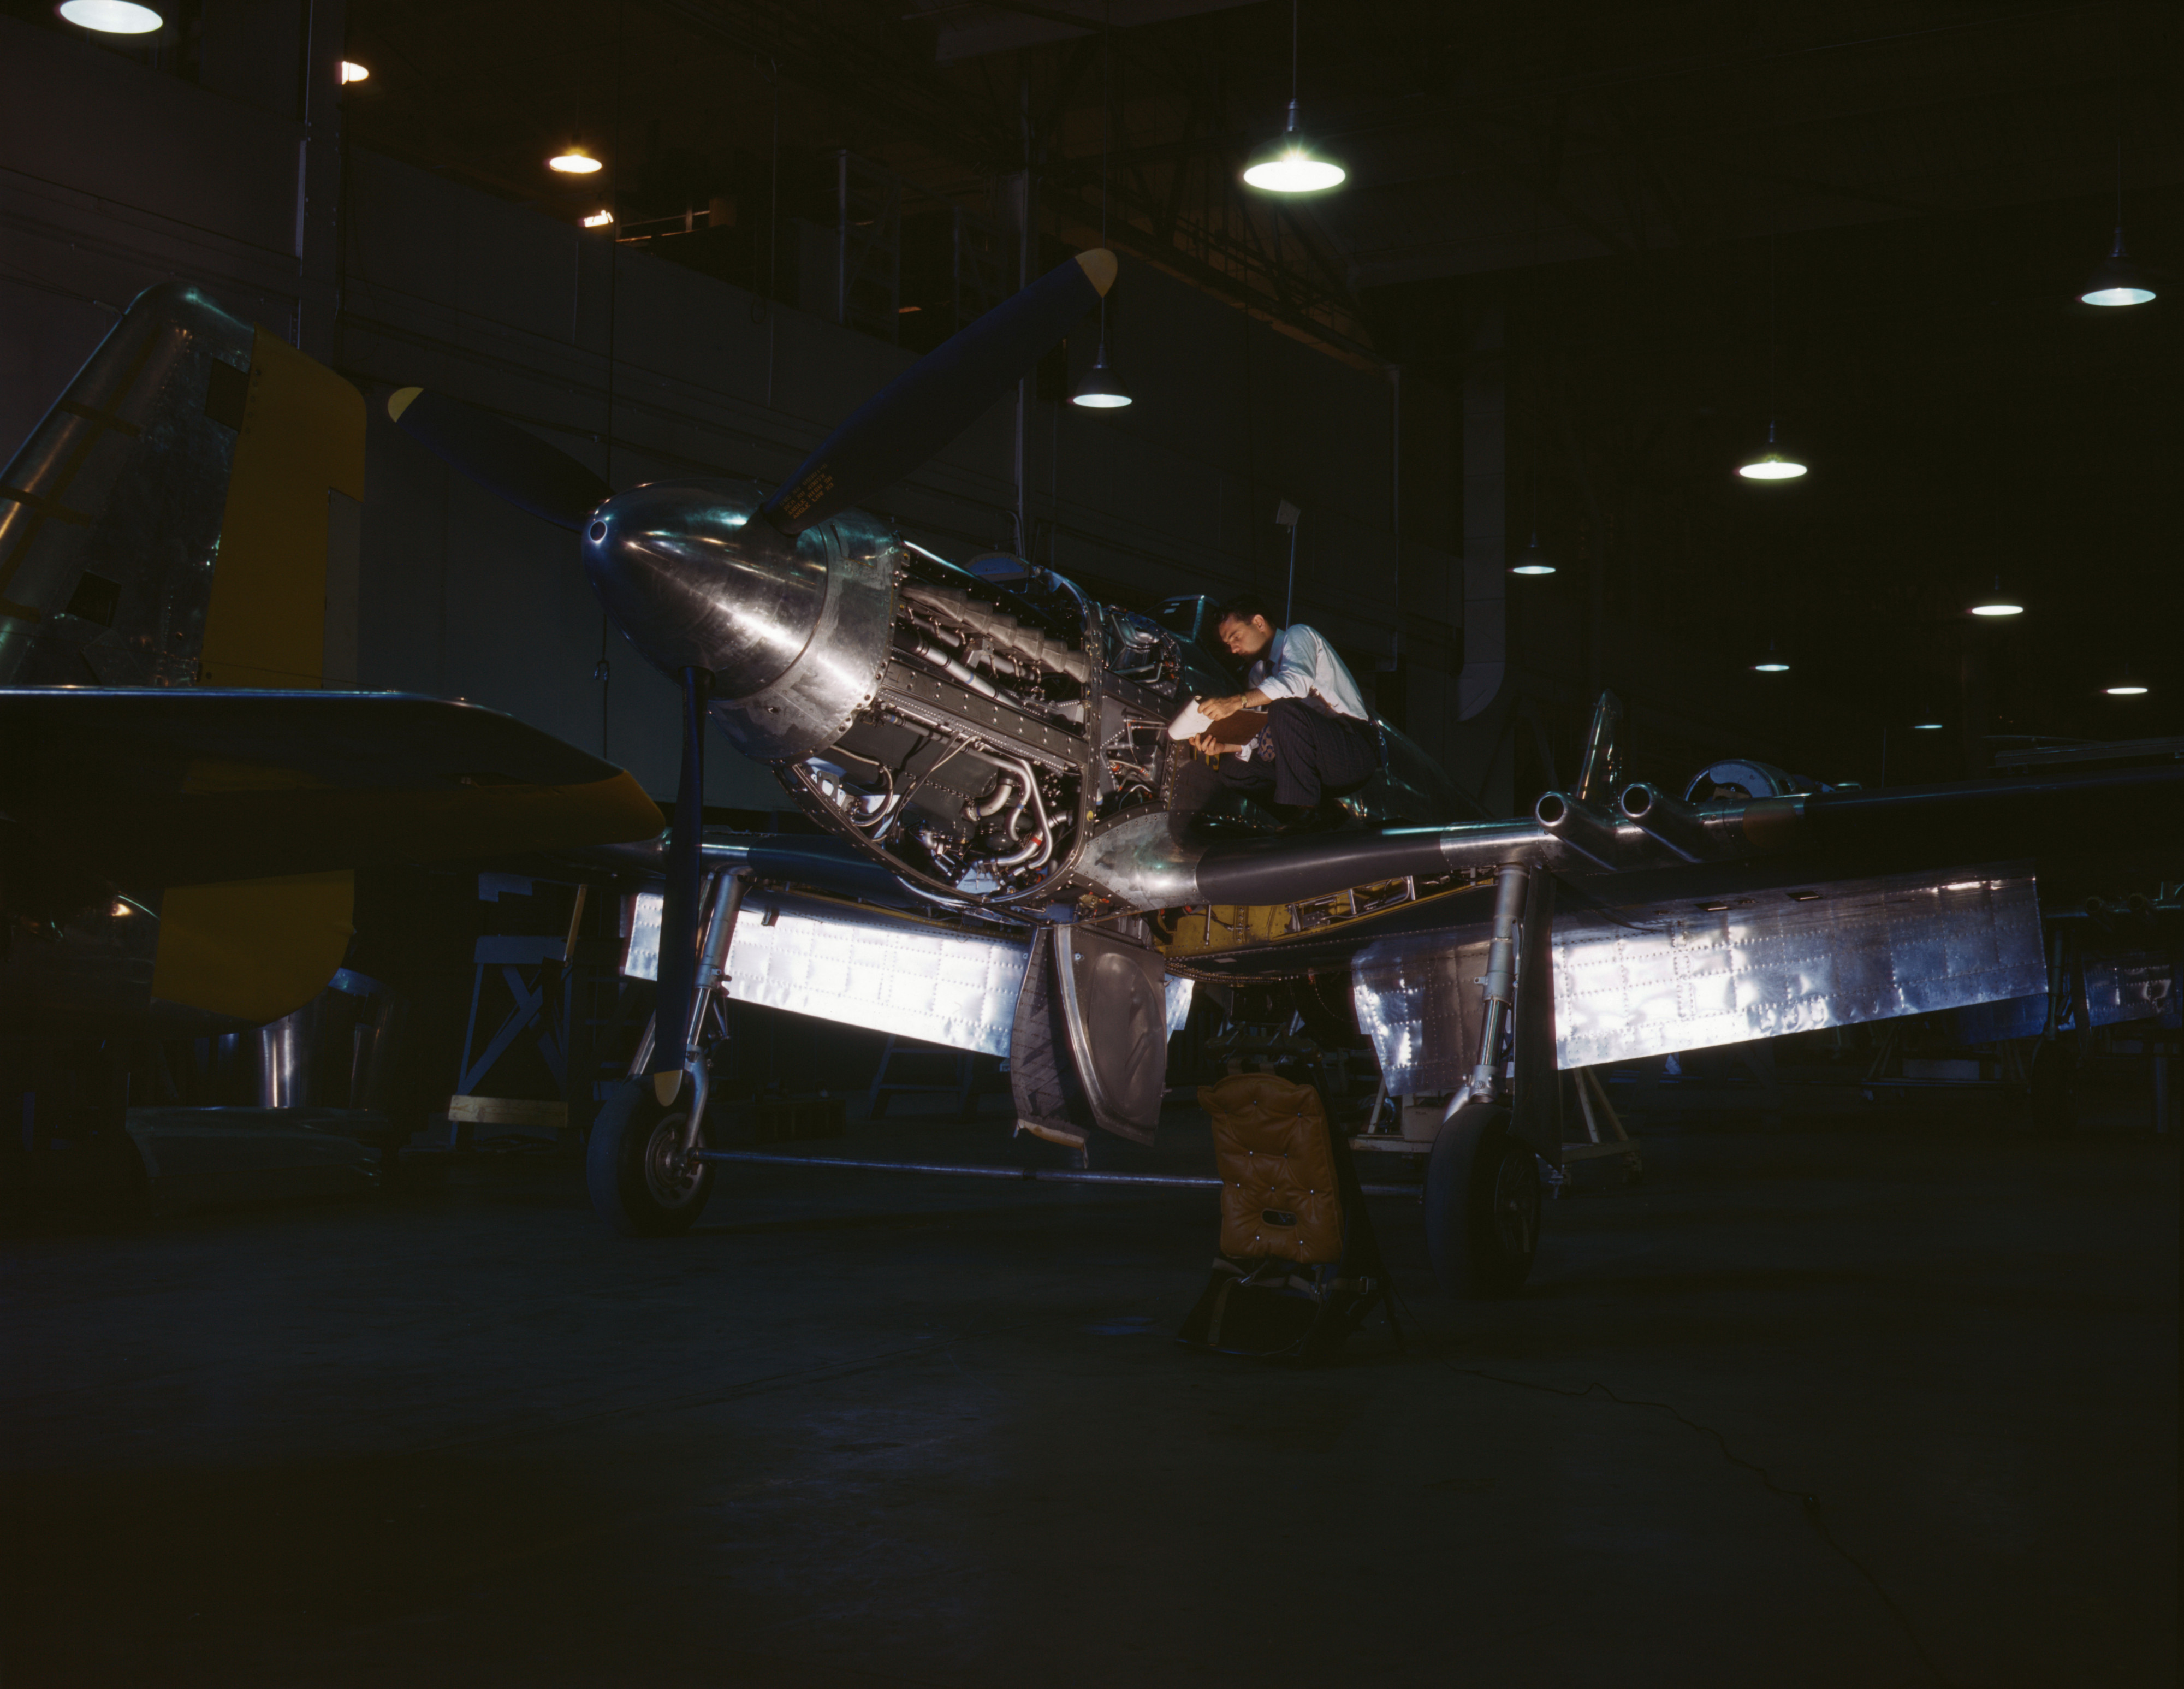 P-51 Mustang fighter under construction, North American Aviation plant, Los Angeles, California, United States, circa 1942